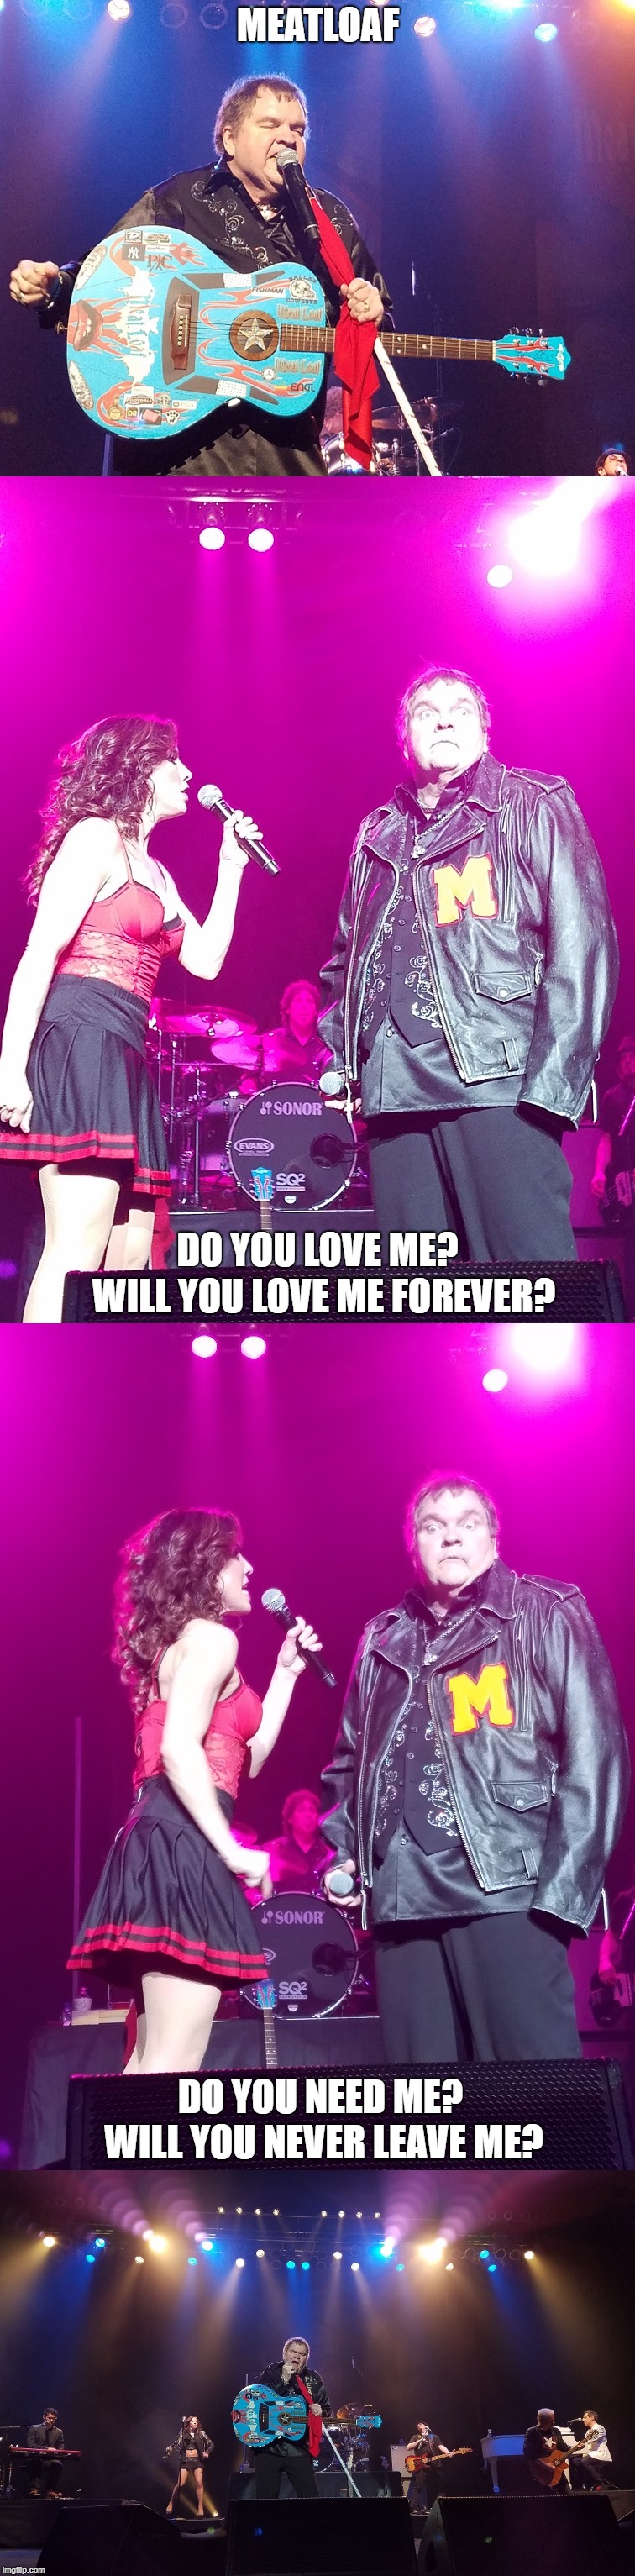 Live in Concert - Glowing Like the Metal on the Edge of a Knife | MEATLOAF; DO YOU LOVE ME? WILL YOU LOVE ME FOREVER? DO YOU NEED ME? WILL YOU NEVER LEAVE ME? | image tagged in memes,meatloaf | made w/ Imgflip meme maker